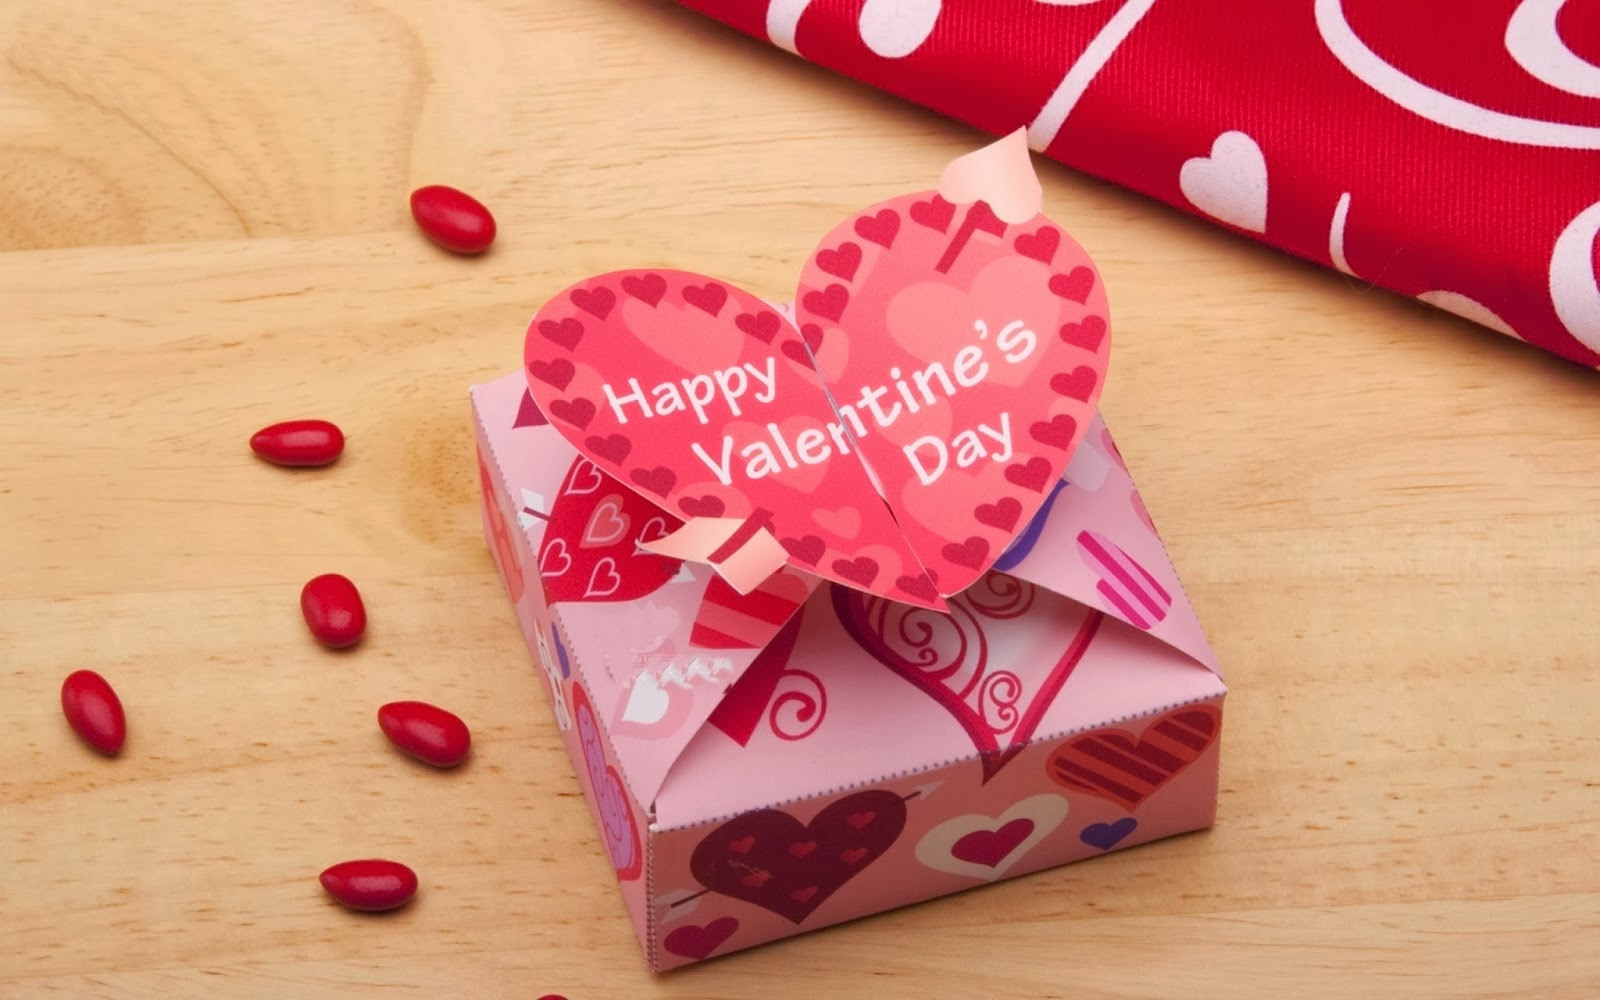 Valentines Day Ideas 2019
 Best Valentine’s Day Gifts Ideas for Brother 2019 A Bud